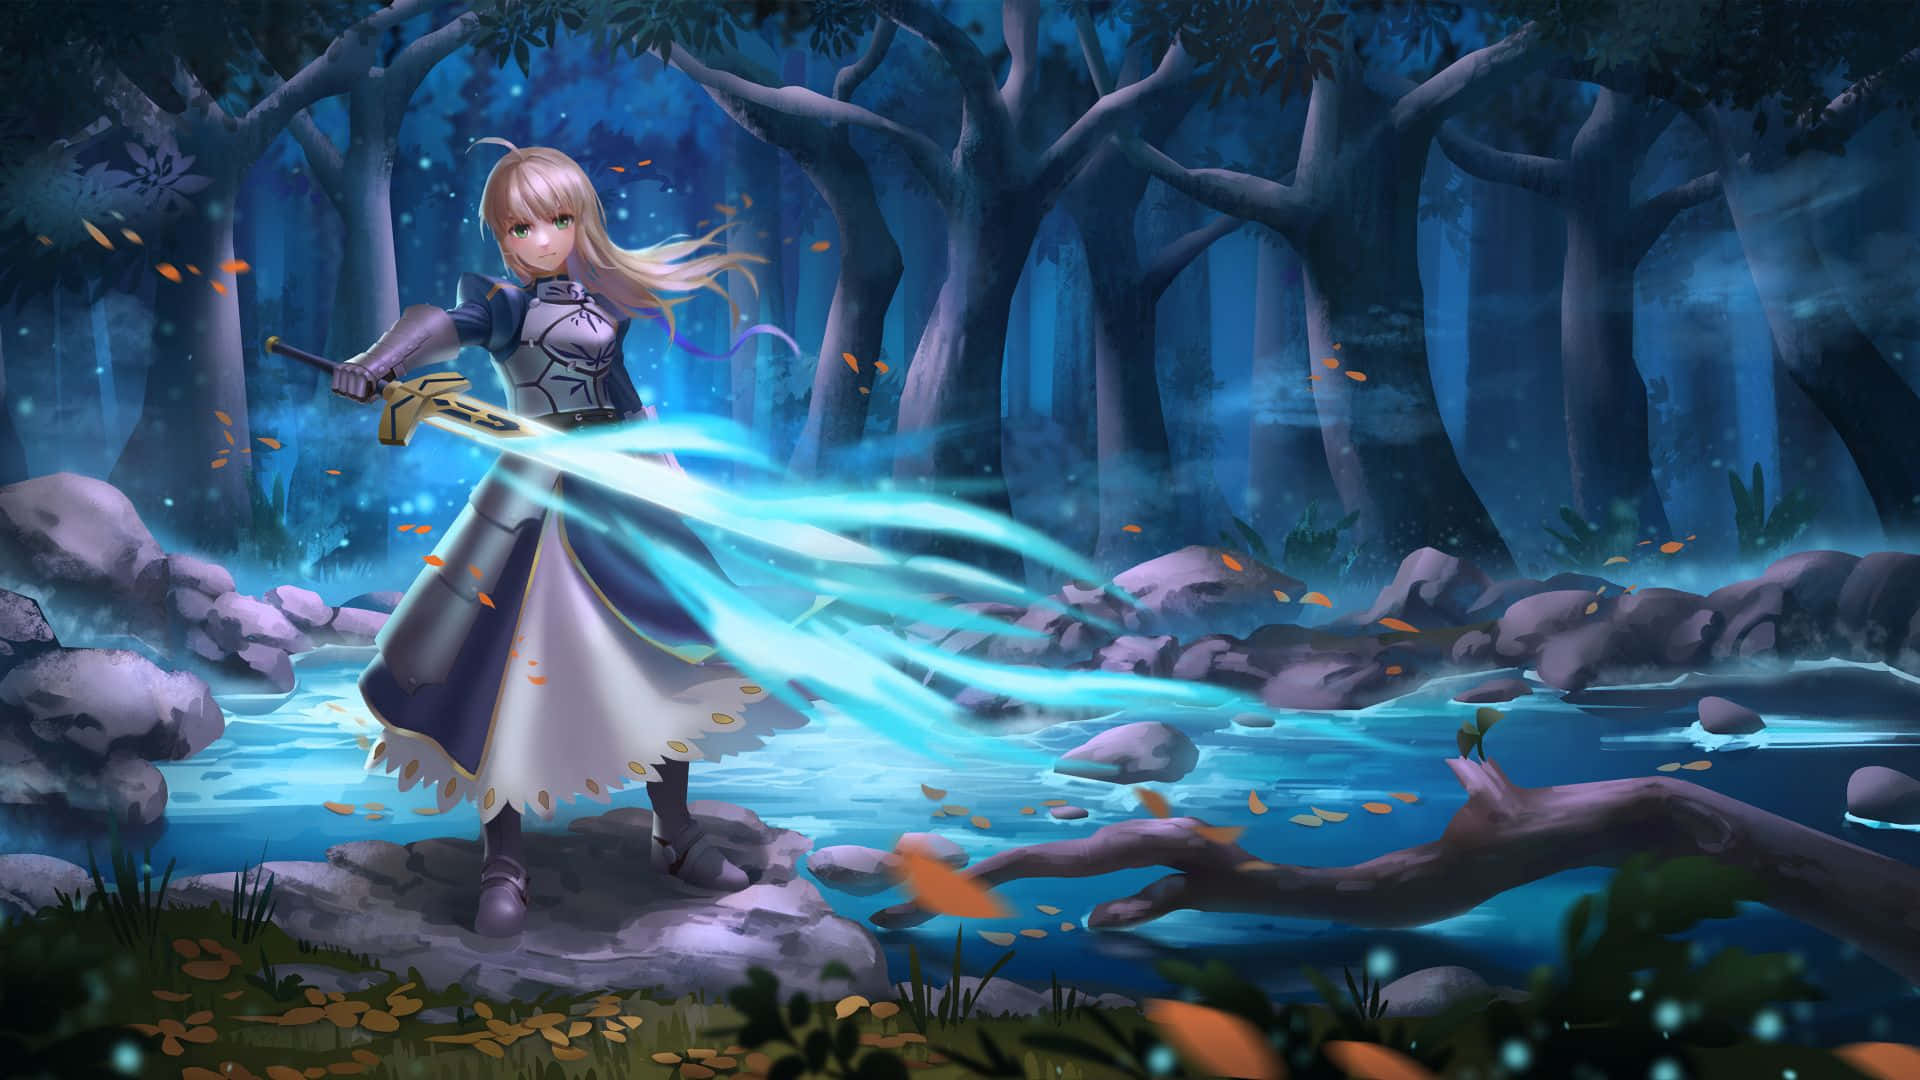 Download Saber Fate Stay Night Wallpaper 